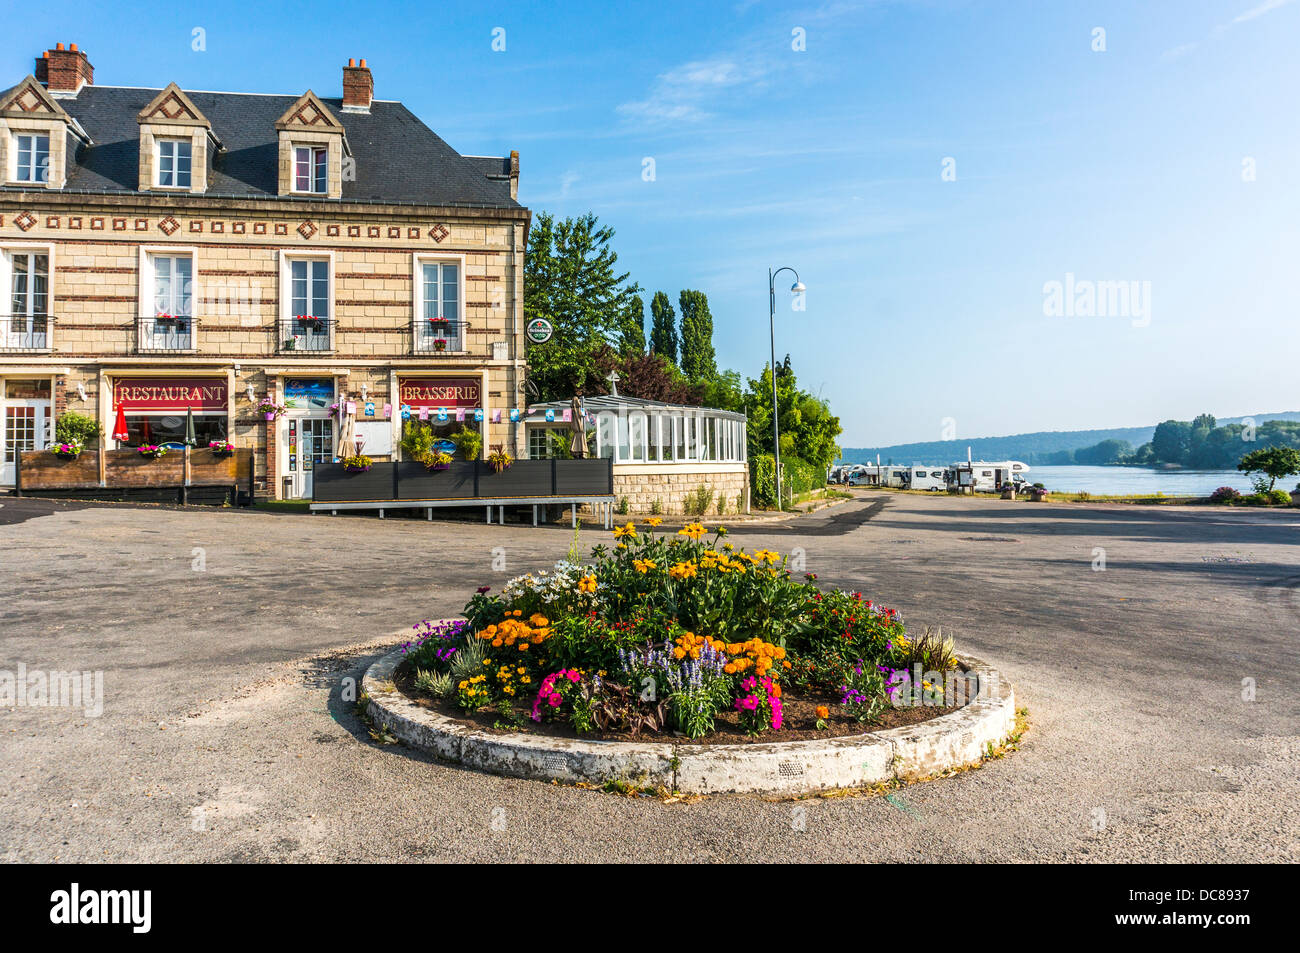 Restaurant and aire de camping-car next to the river, La Mailleraye-sur-Seine, Seine-Maritime, Haute-Normandie in northern France. Stock Photo